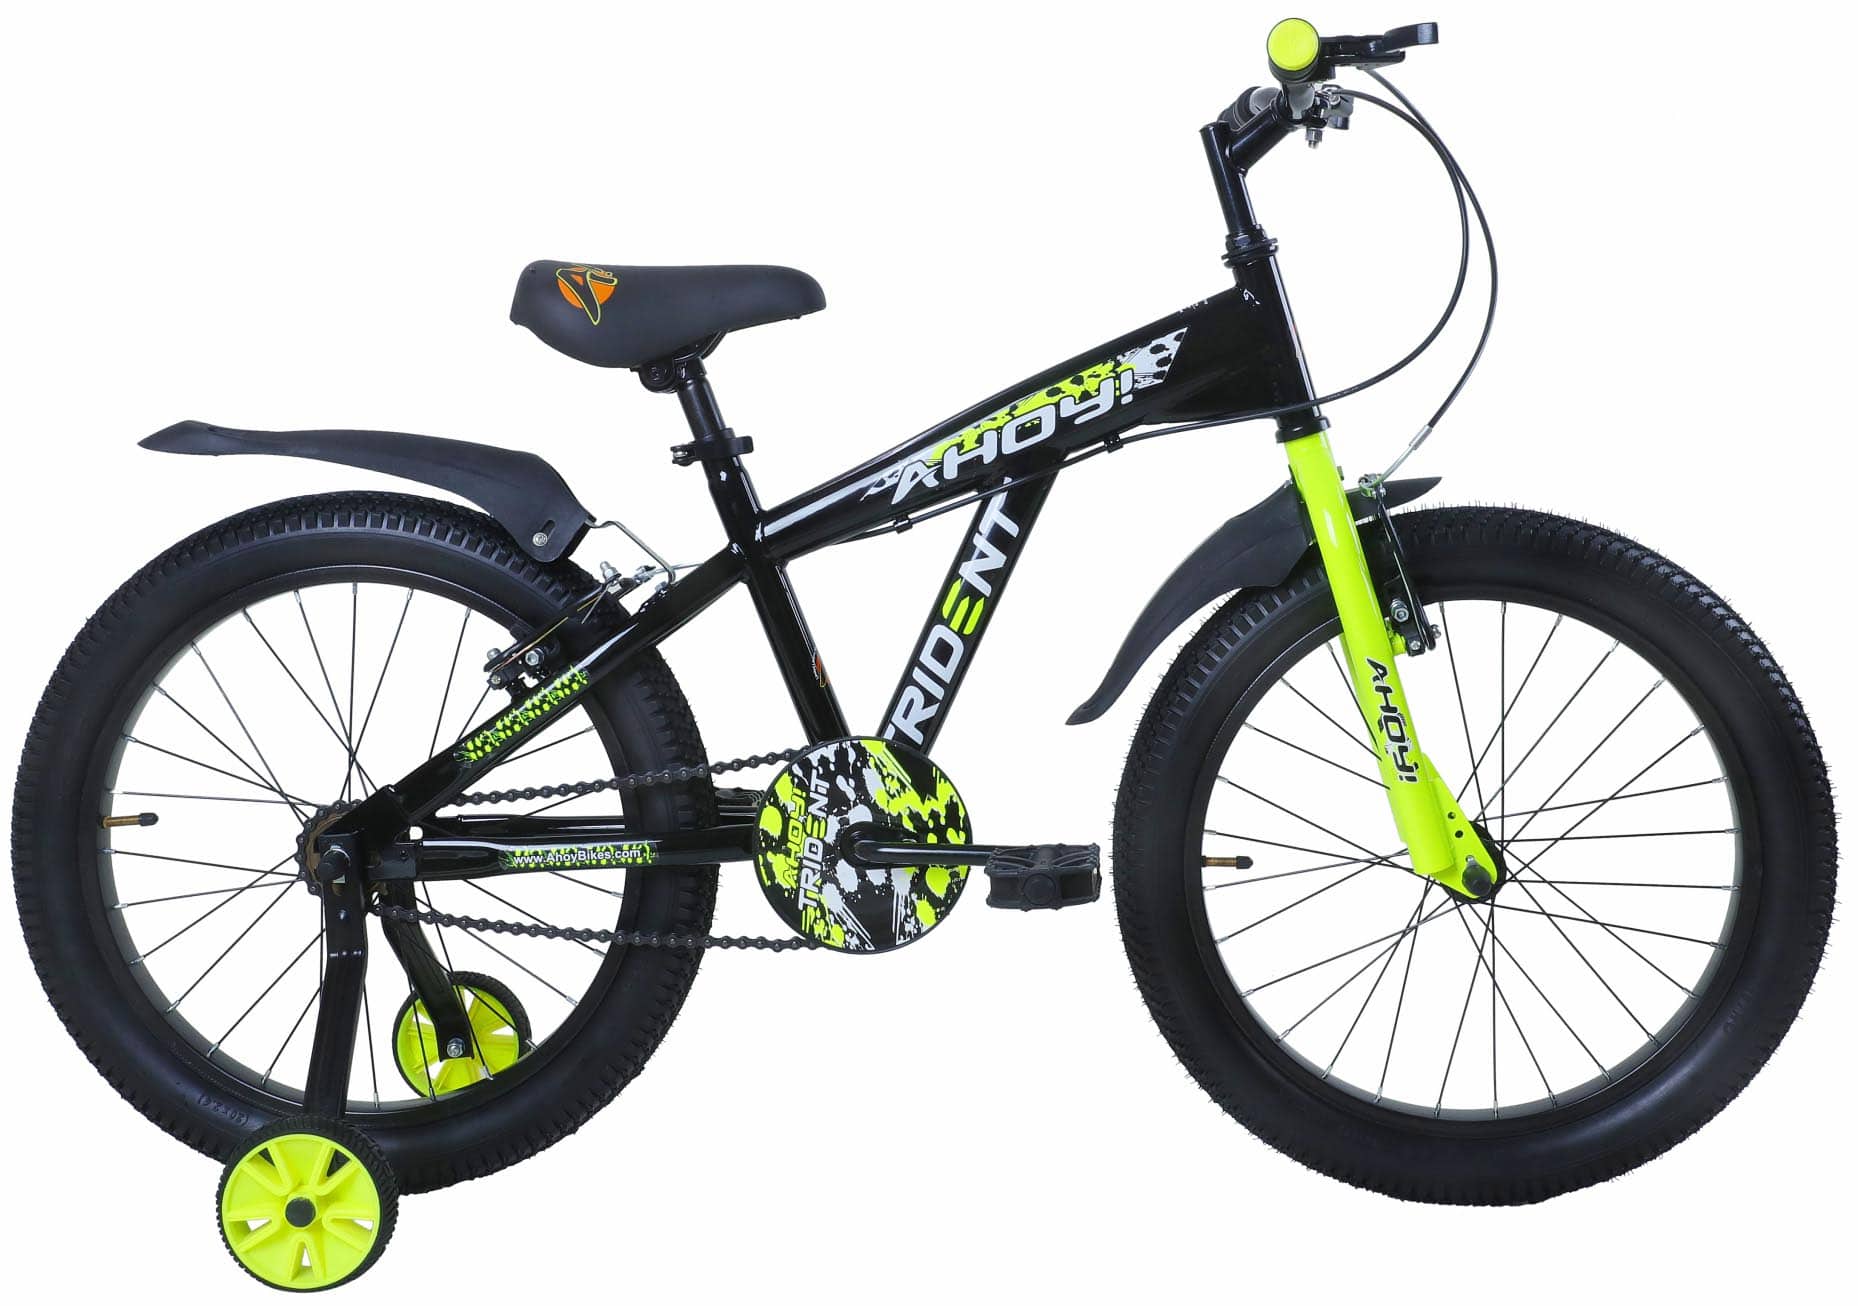 Trident Kids Bike Single Speed 20T | Buy Black Cycle Non Gear for Juniors